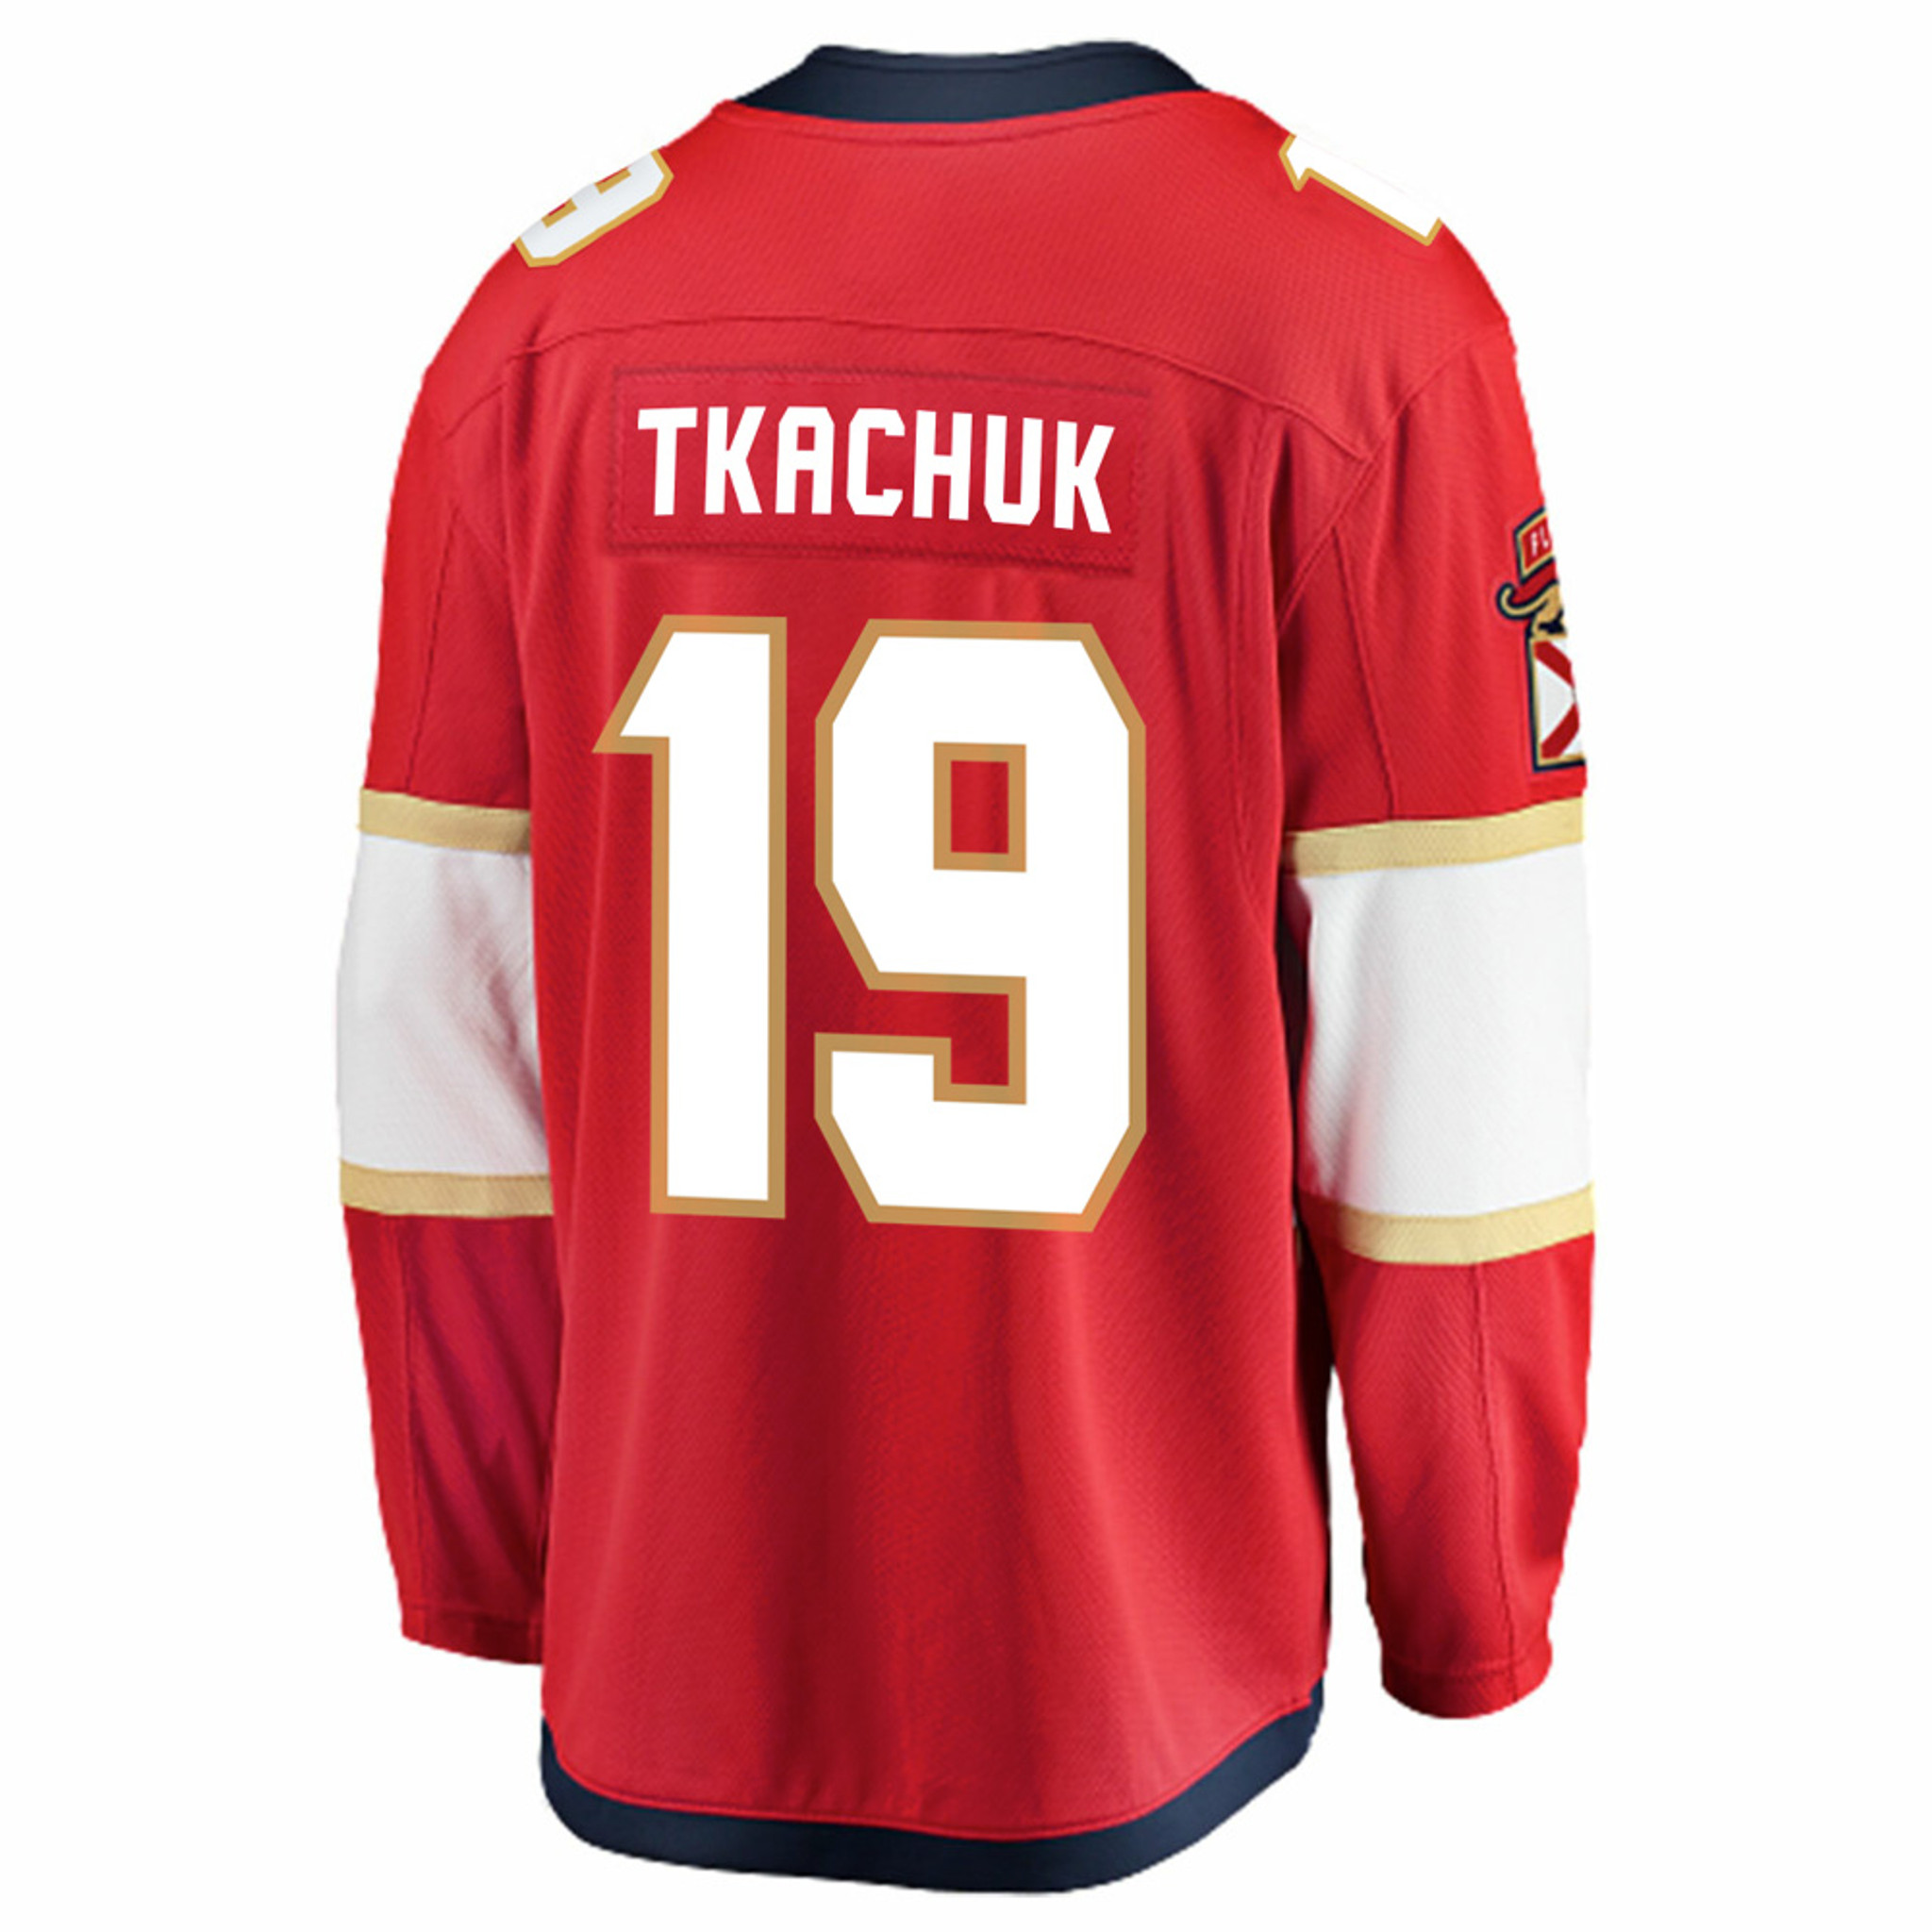 Florida Panthers adidas Reverse Retro Jersey Available at FLATeamShop.com